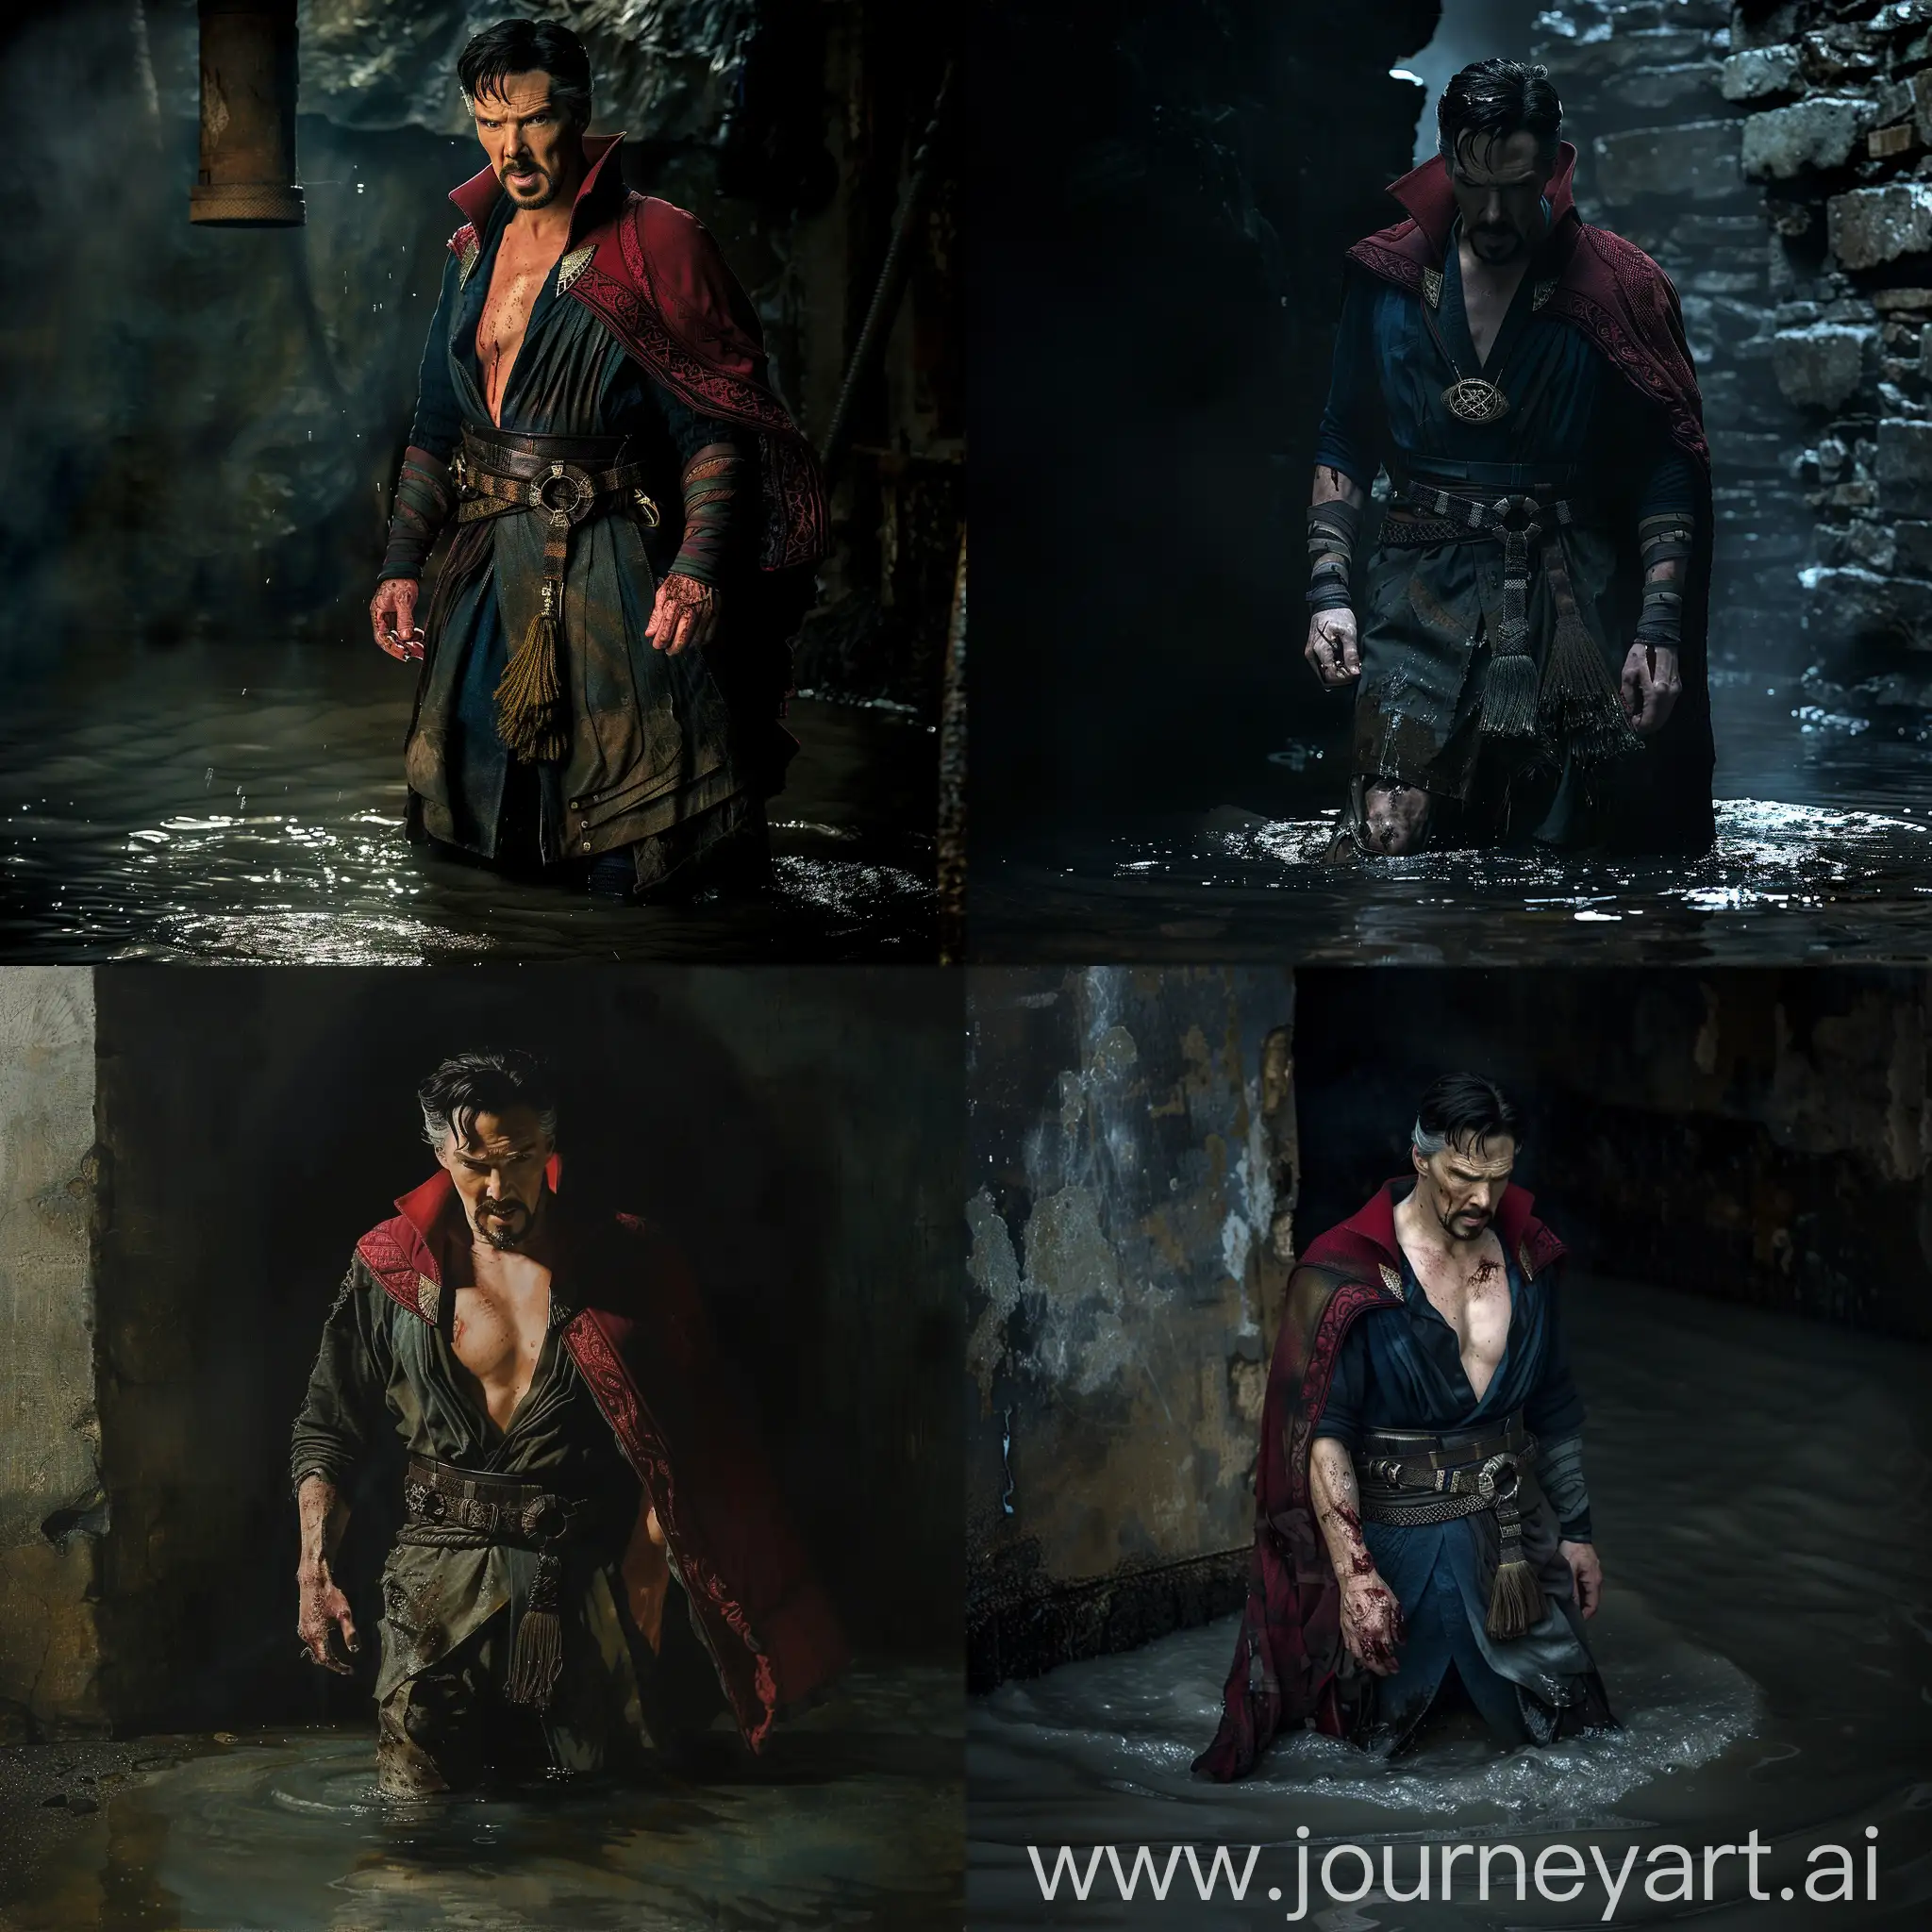 Doctor Strange in ripped, torn, ragged, dirty outfit, shirtless, in a dark room, water rising to his knees.